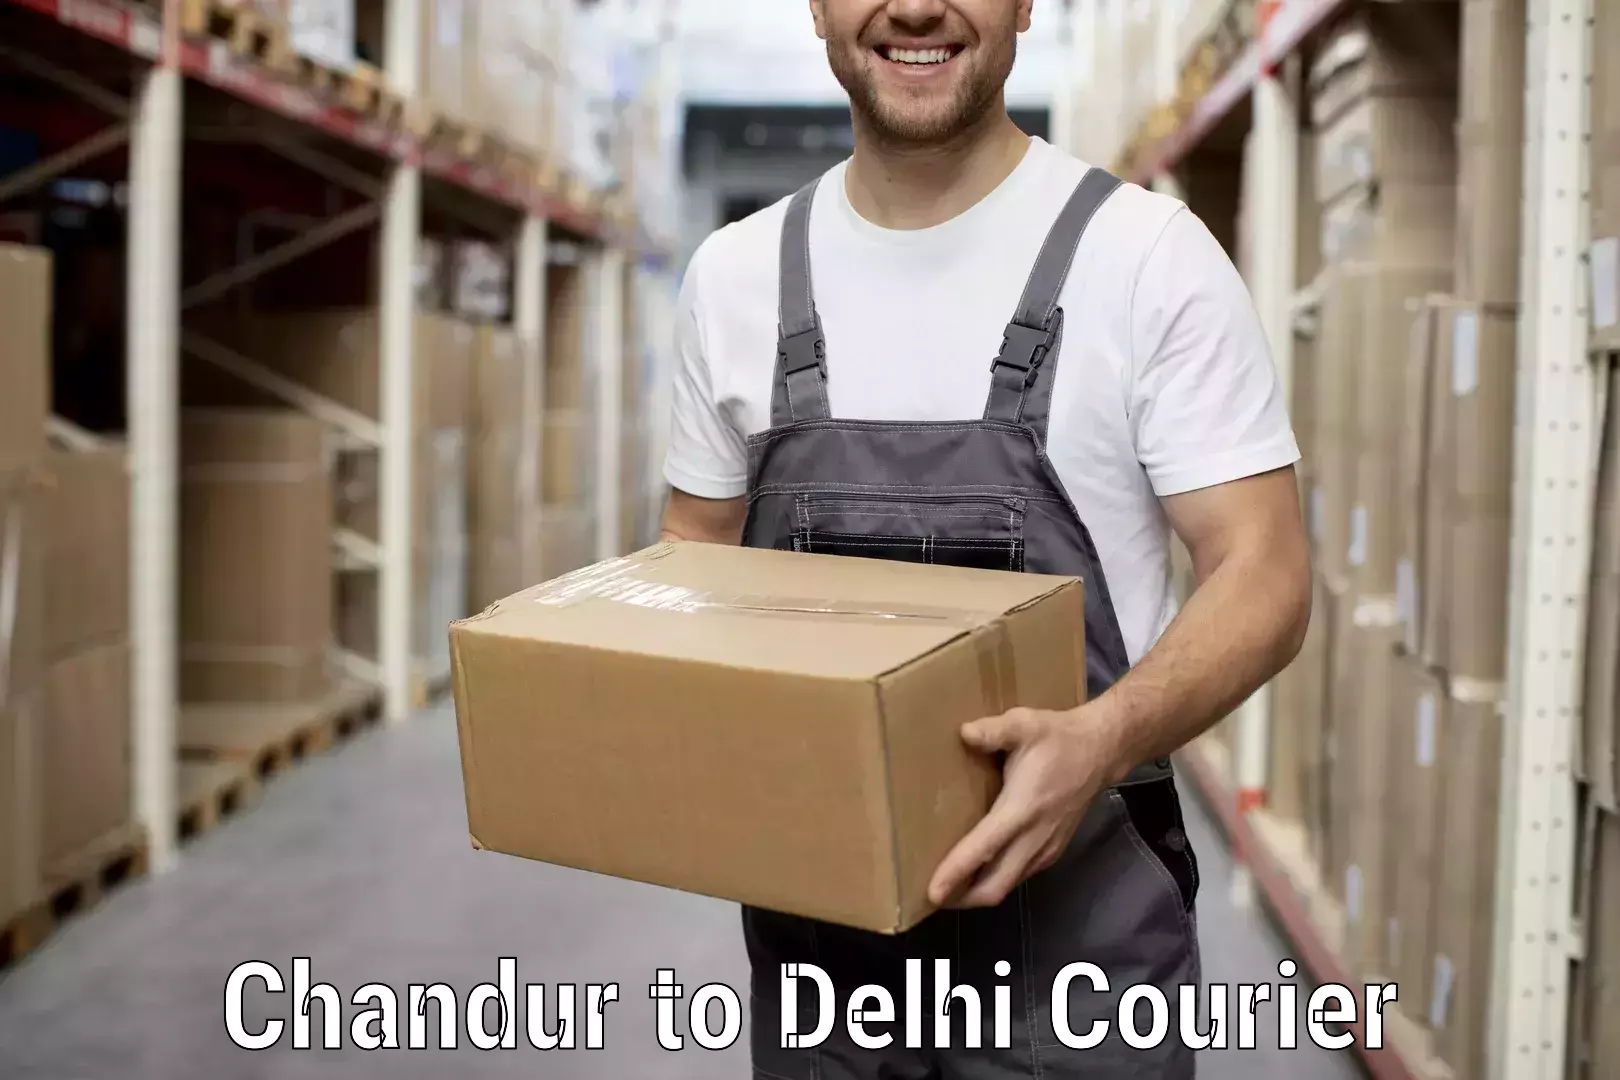 Specialized moving company Chandur to Delhi